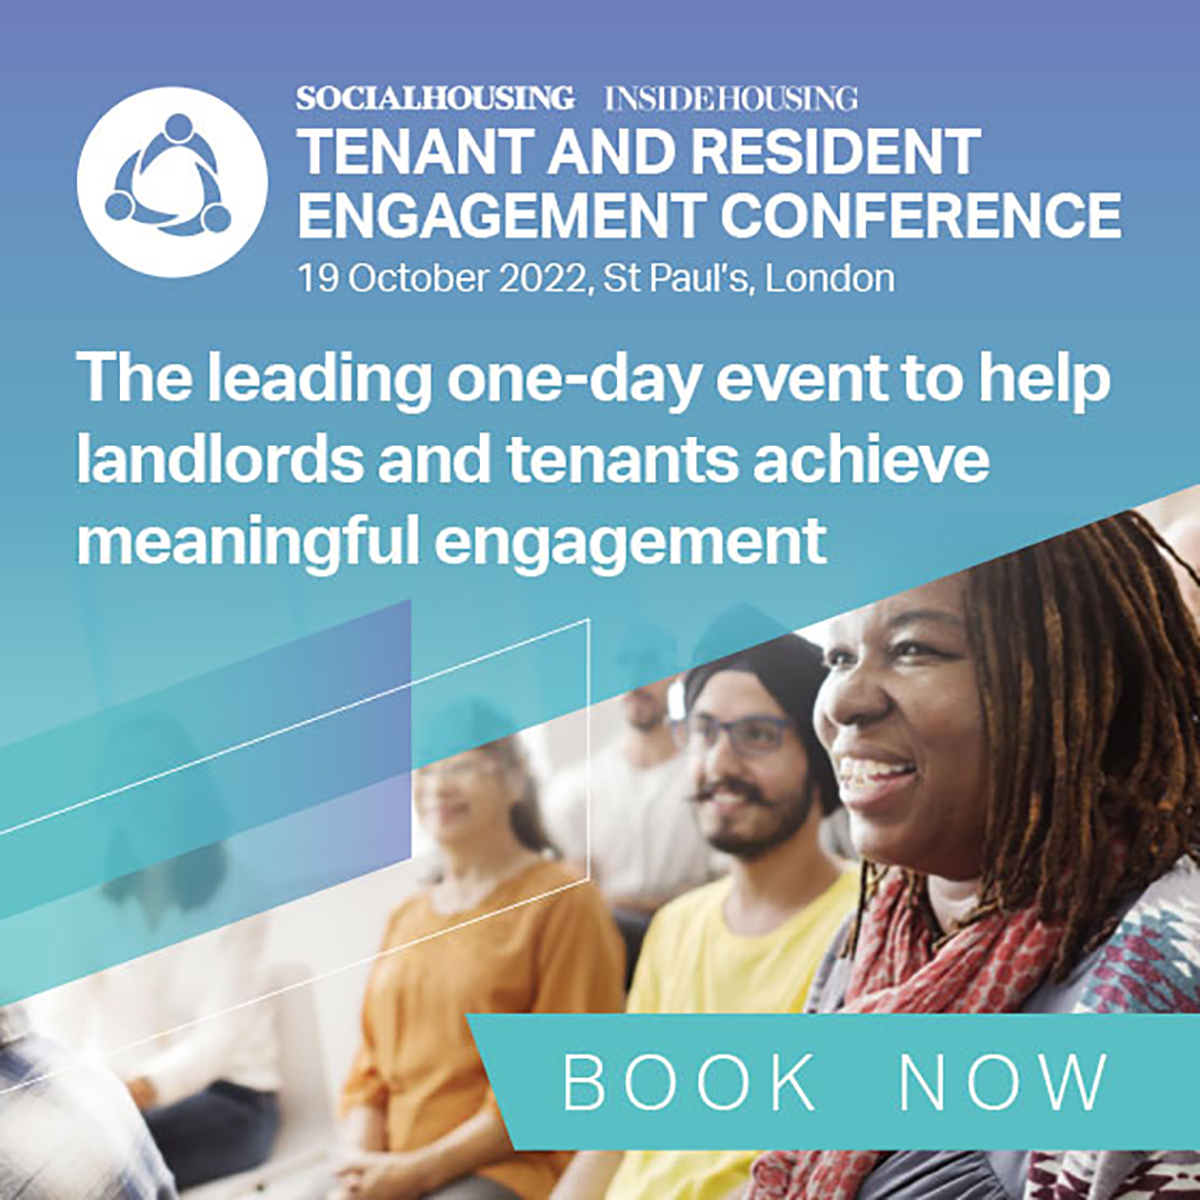 Sign up to the Tenant and Resident Engagement Conference